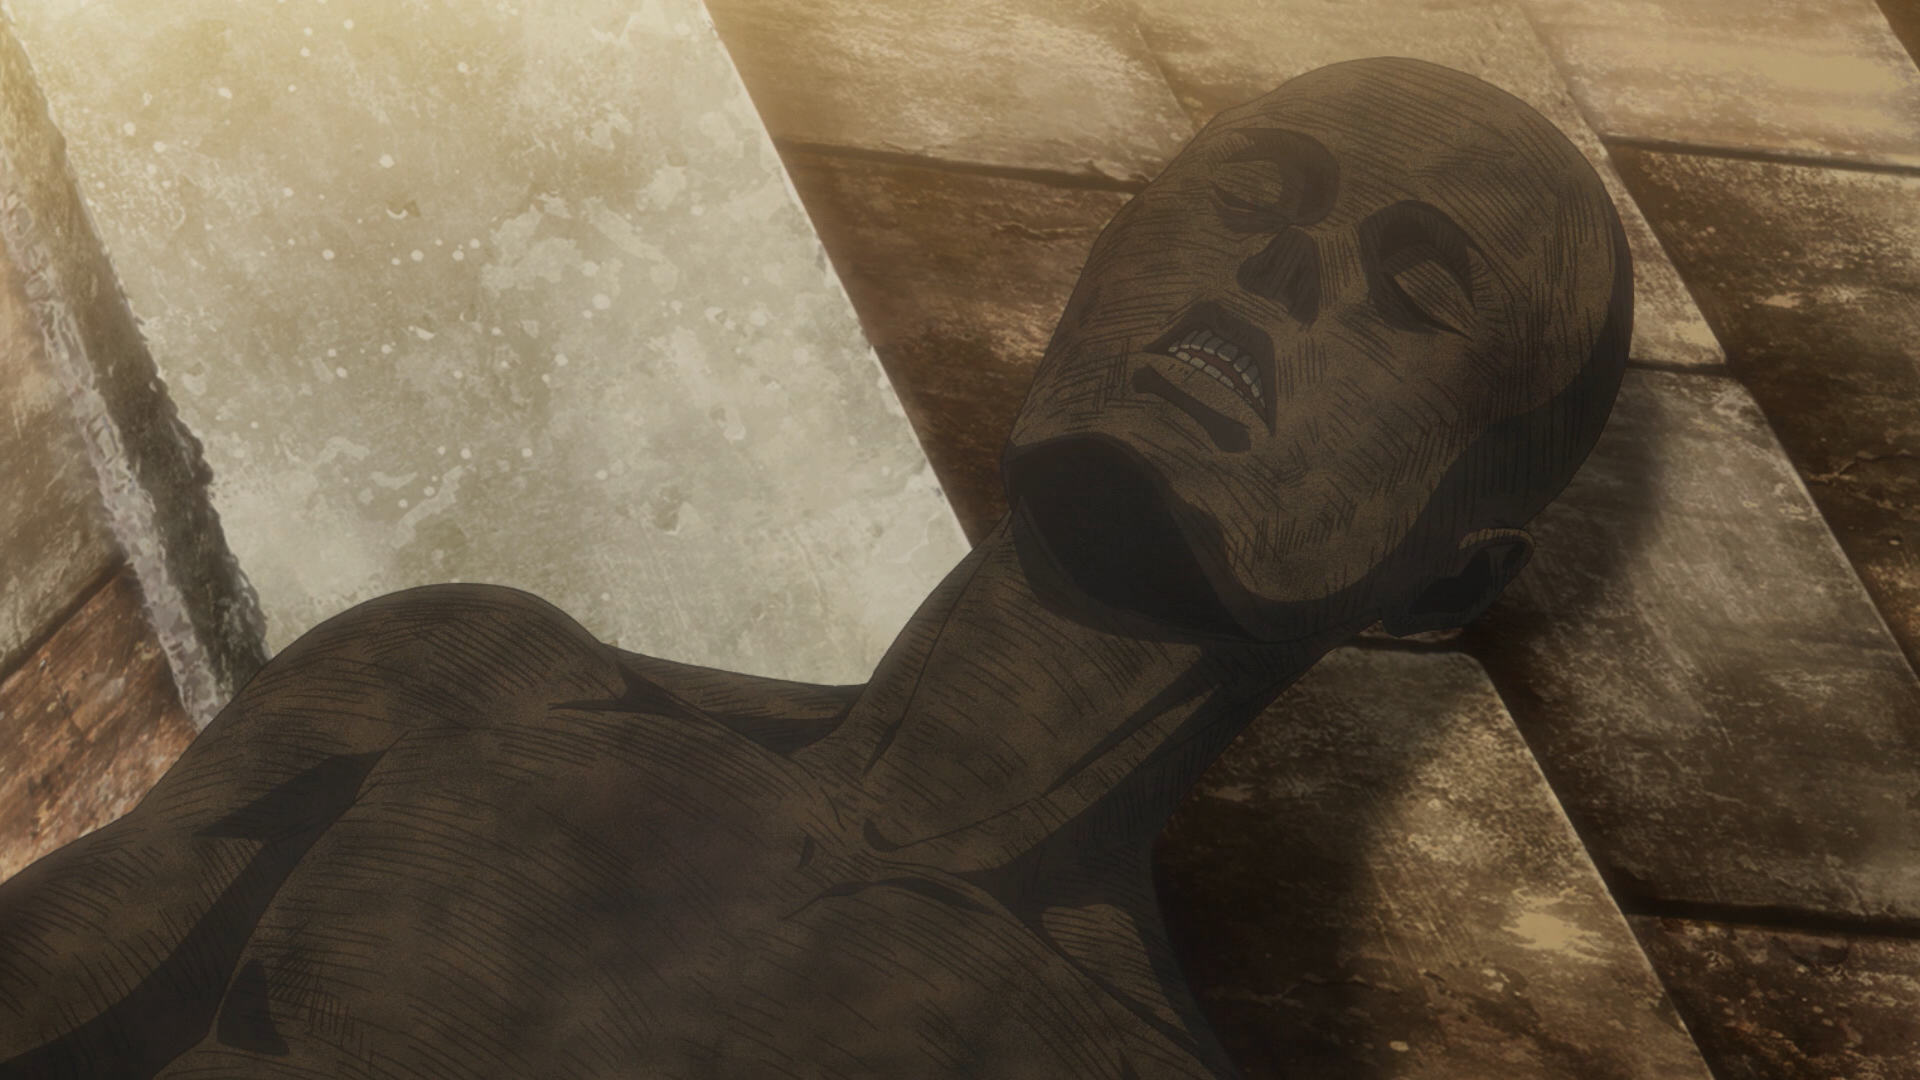 Armin's burnt body is discovered 